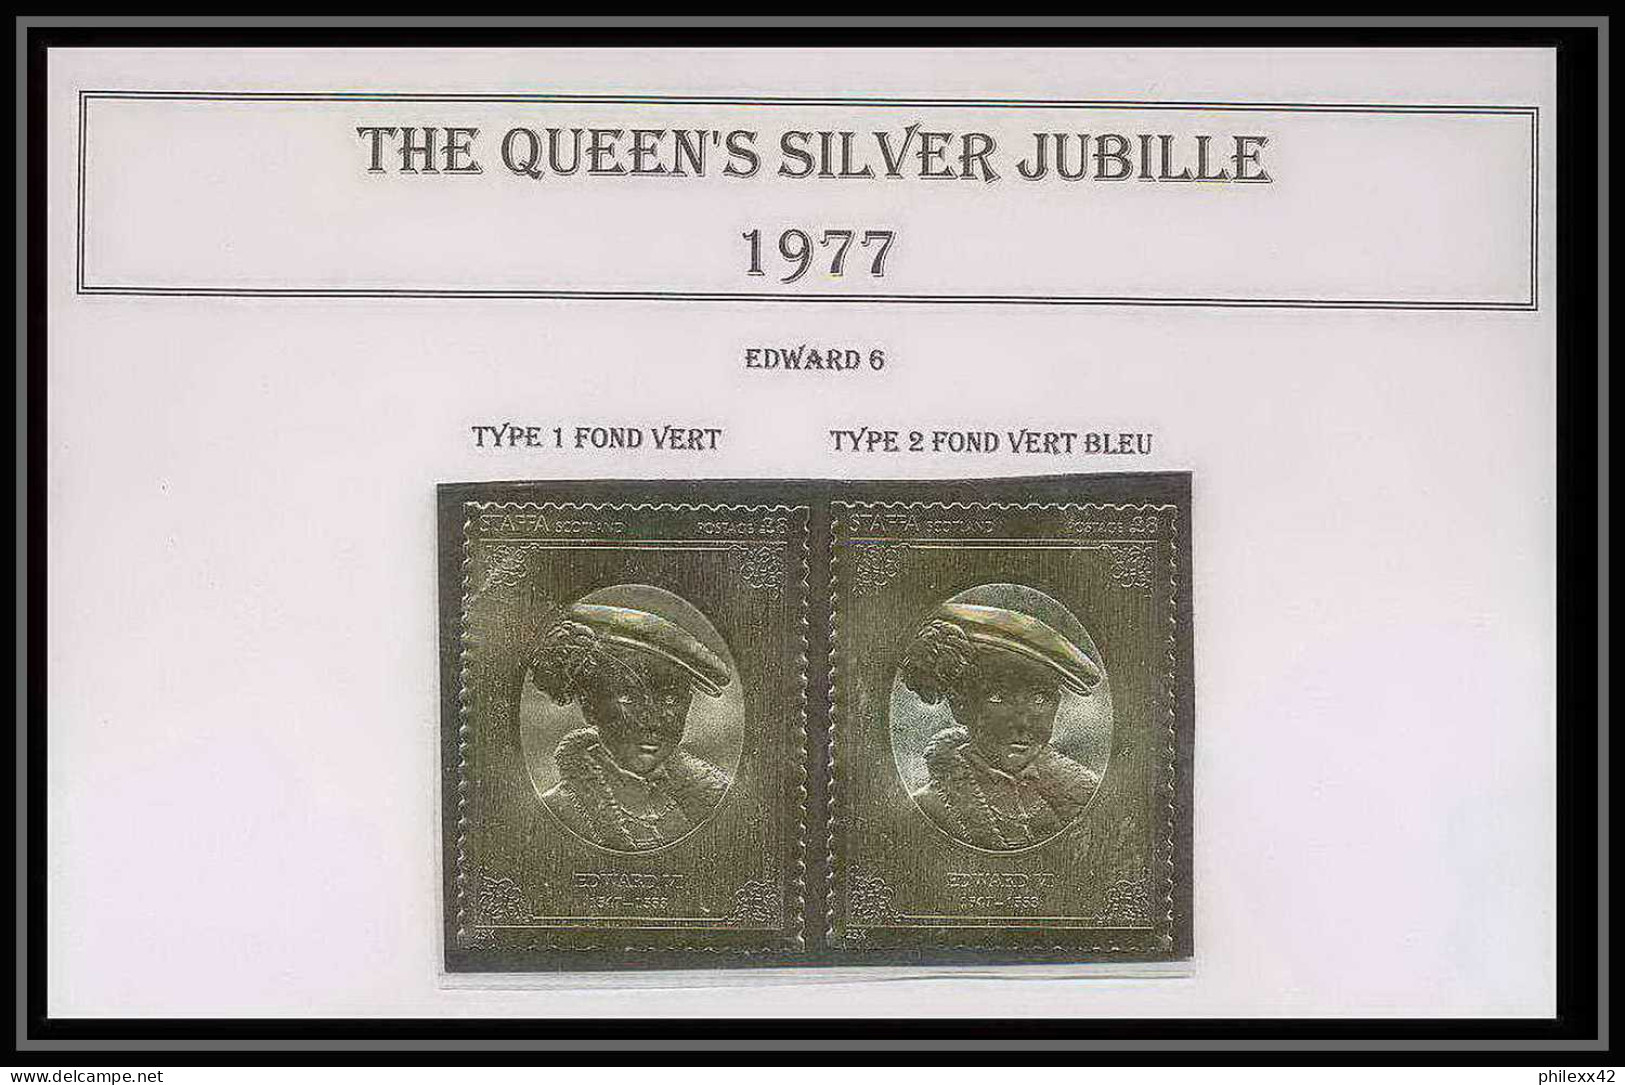 460 Staffa Scotland The Queen's Silver Jubilee 1977 OR Gold Stamps Monarchy United Kingdom Edward 6 Type 1&2 Neuf** Mnh - Lokale Uitgaven